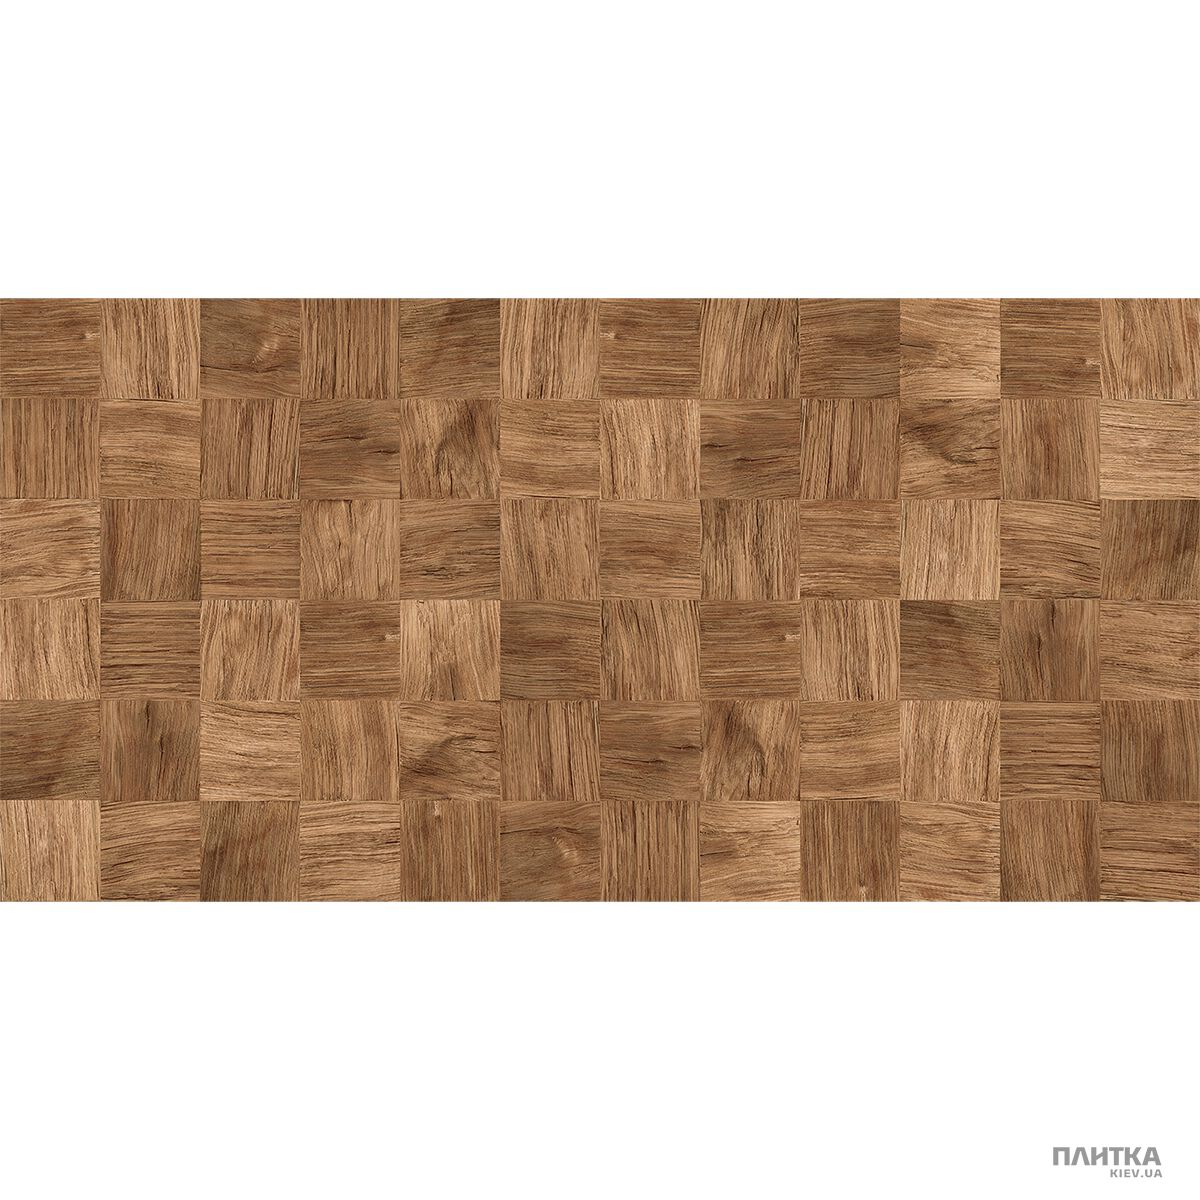 Плитка Golden Tile Country Wood COUNTRY WOOD КОРИЧНЕВЫЙ 2В7061 коричневый